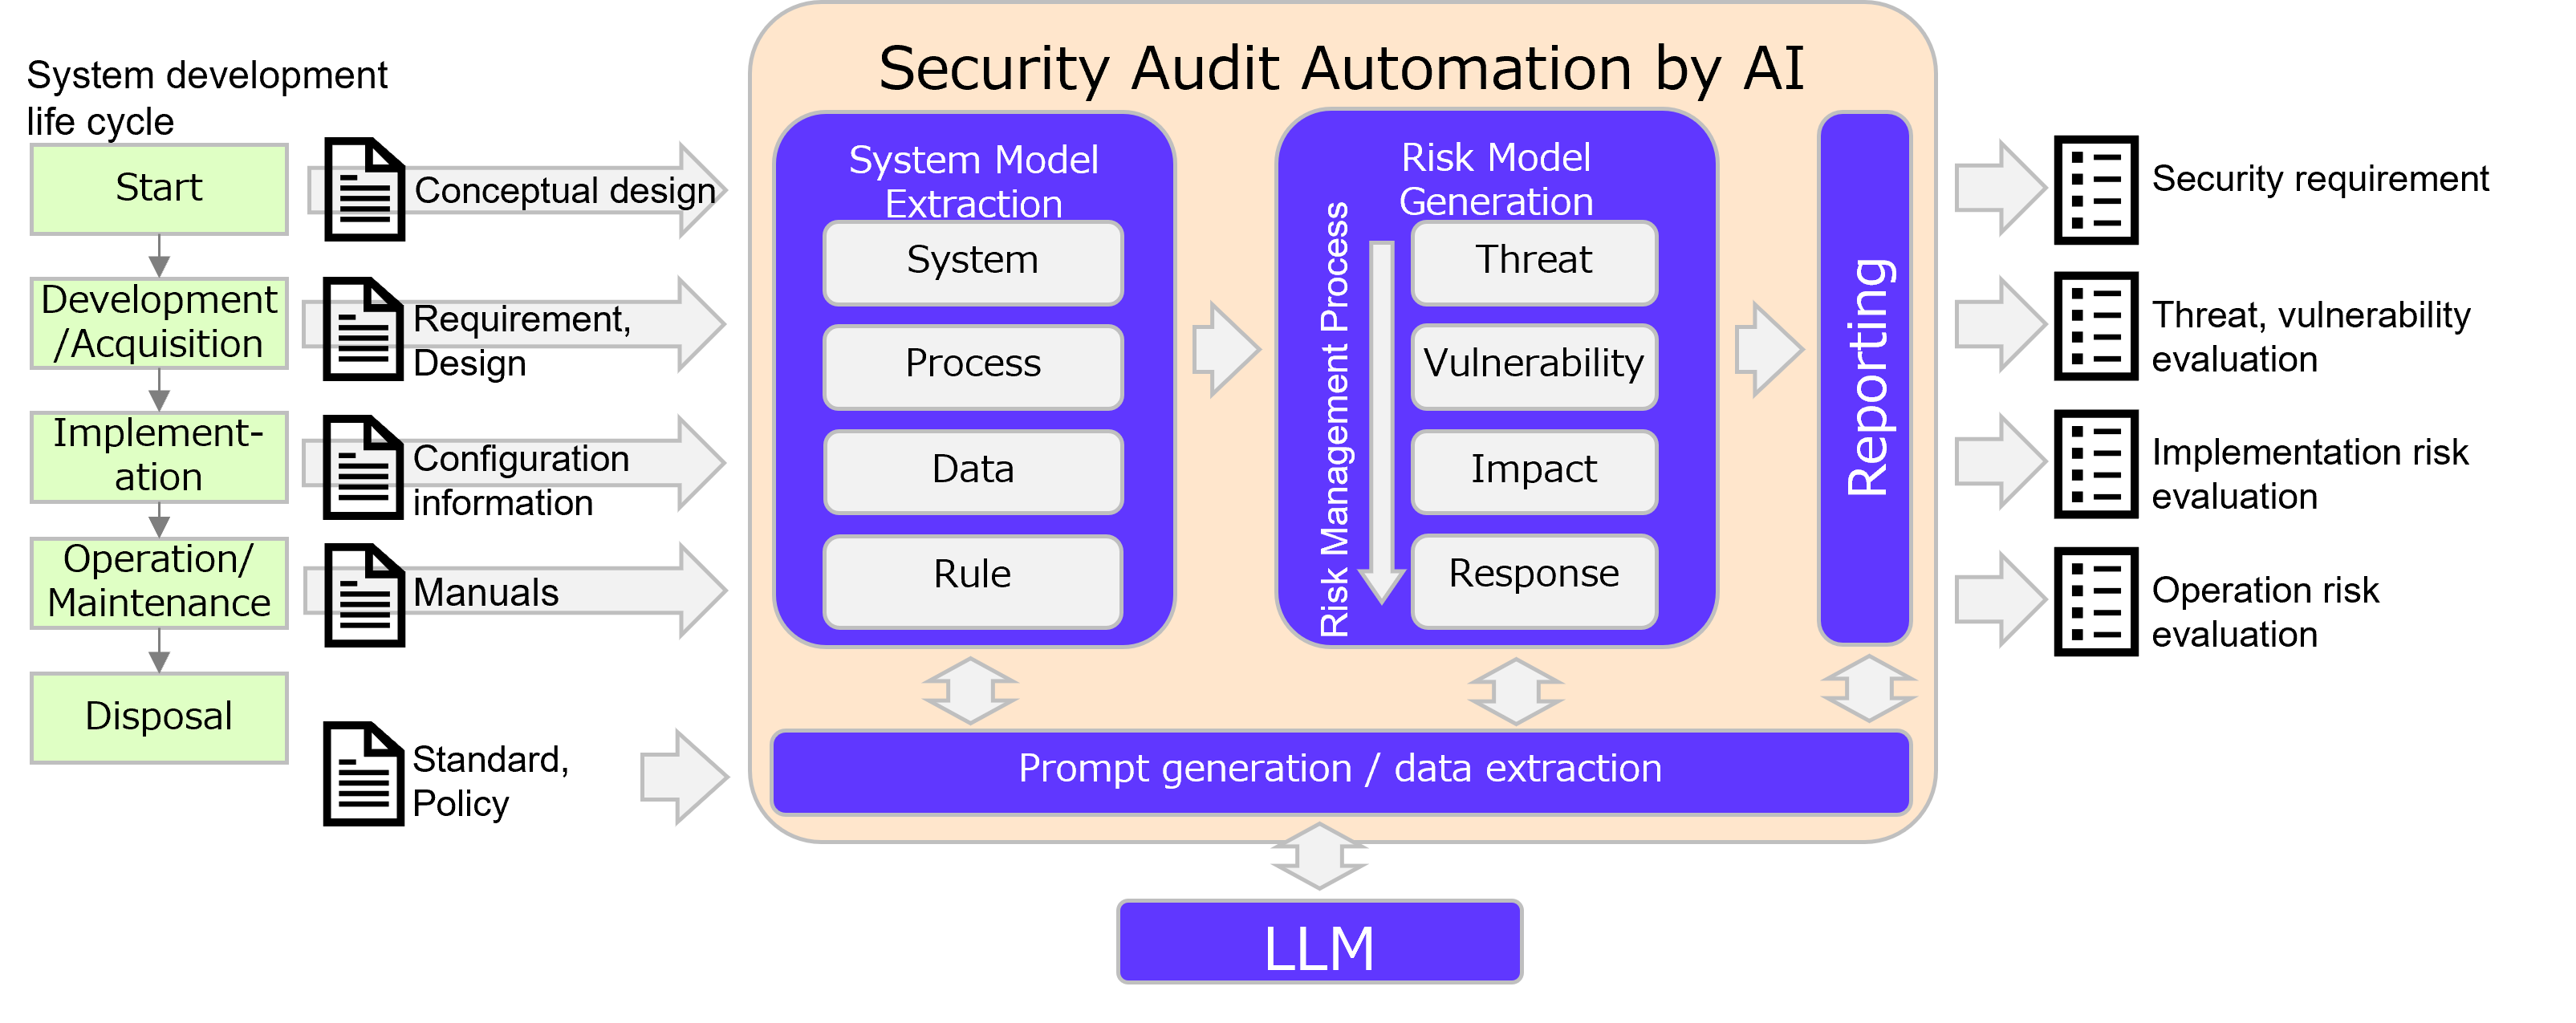 Overview of Security Audit Automation by AI